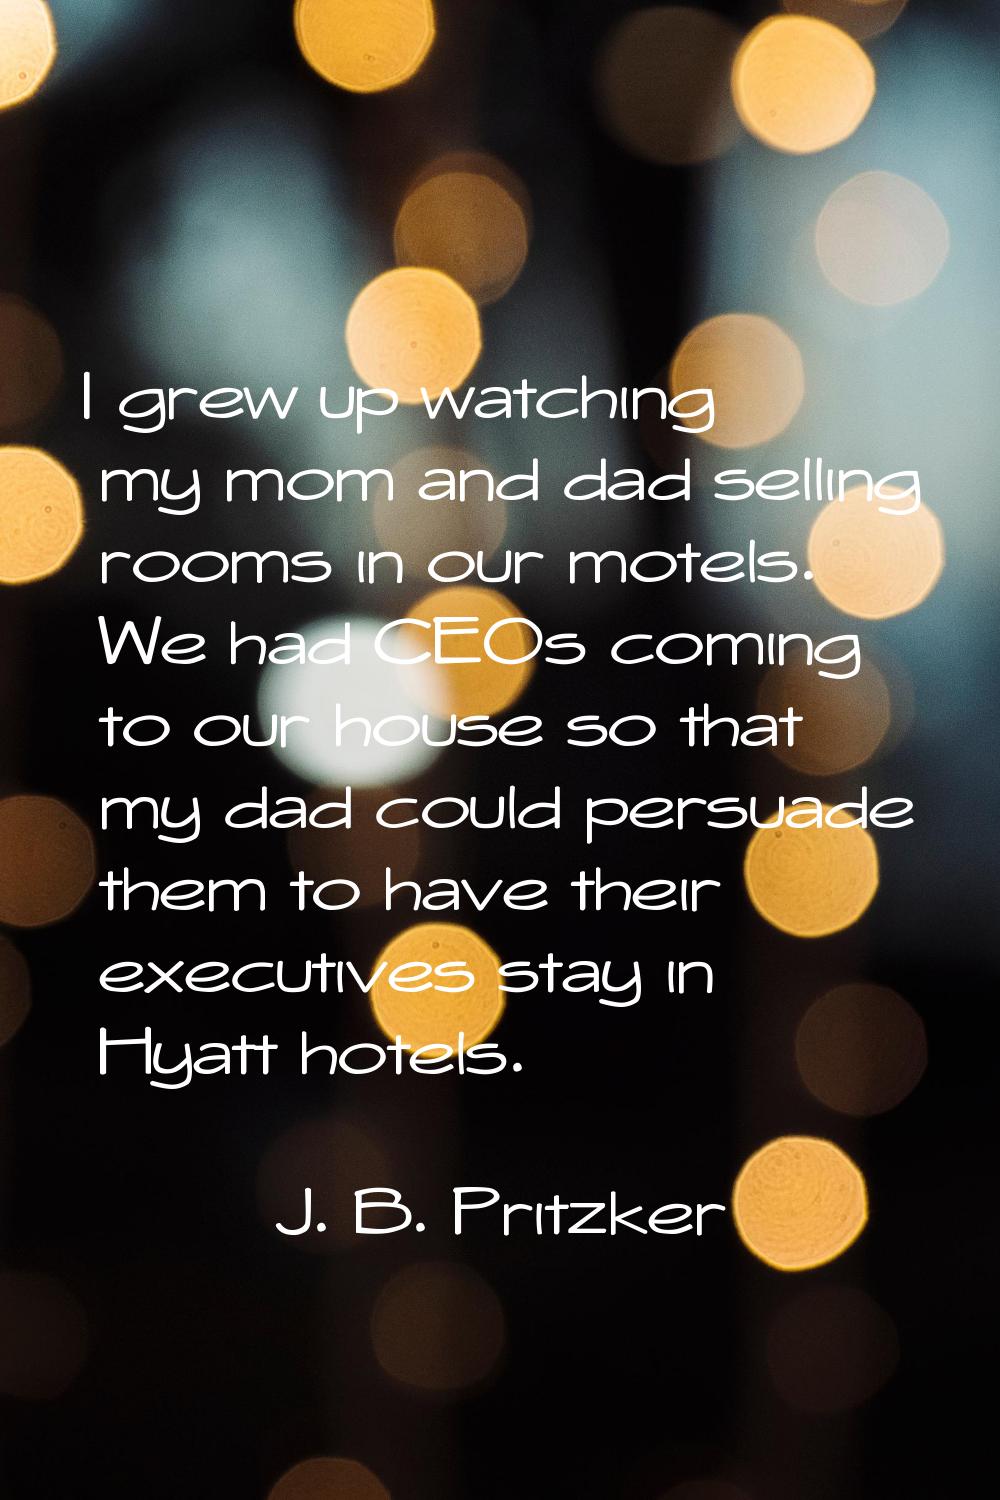 I grew up watching my mom and dad selling rooms in our motels. We had CEOs coming to our house so t